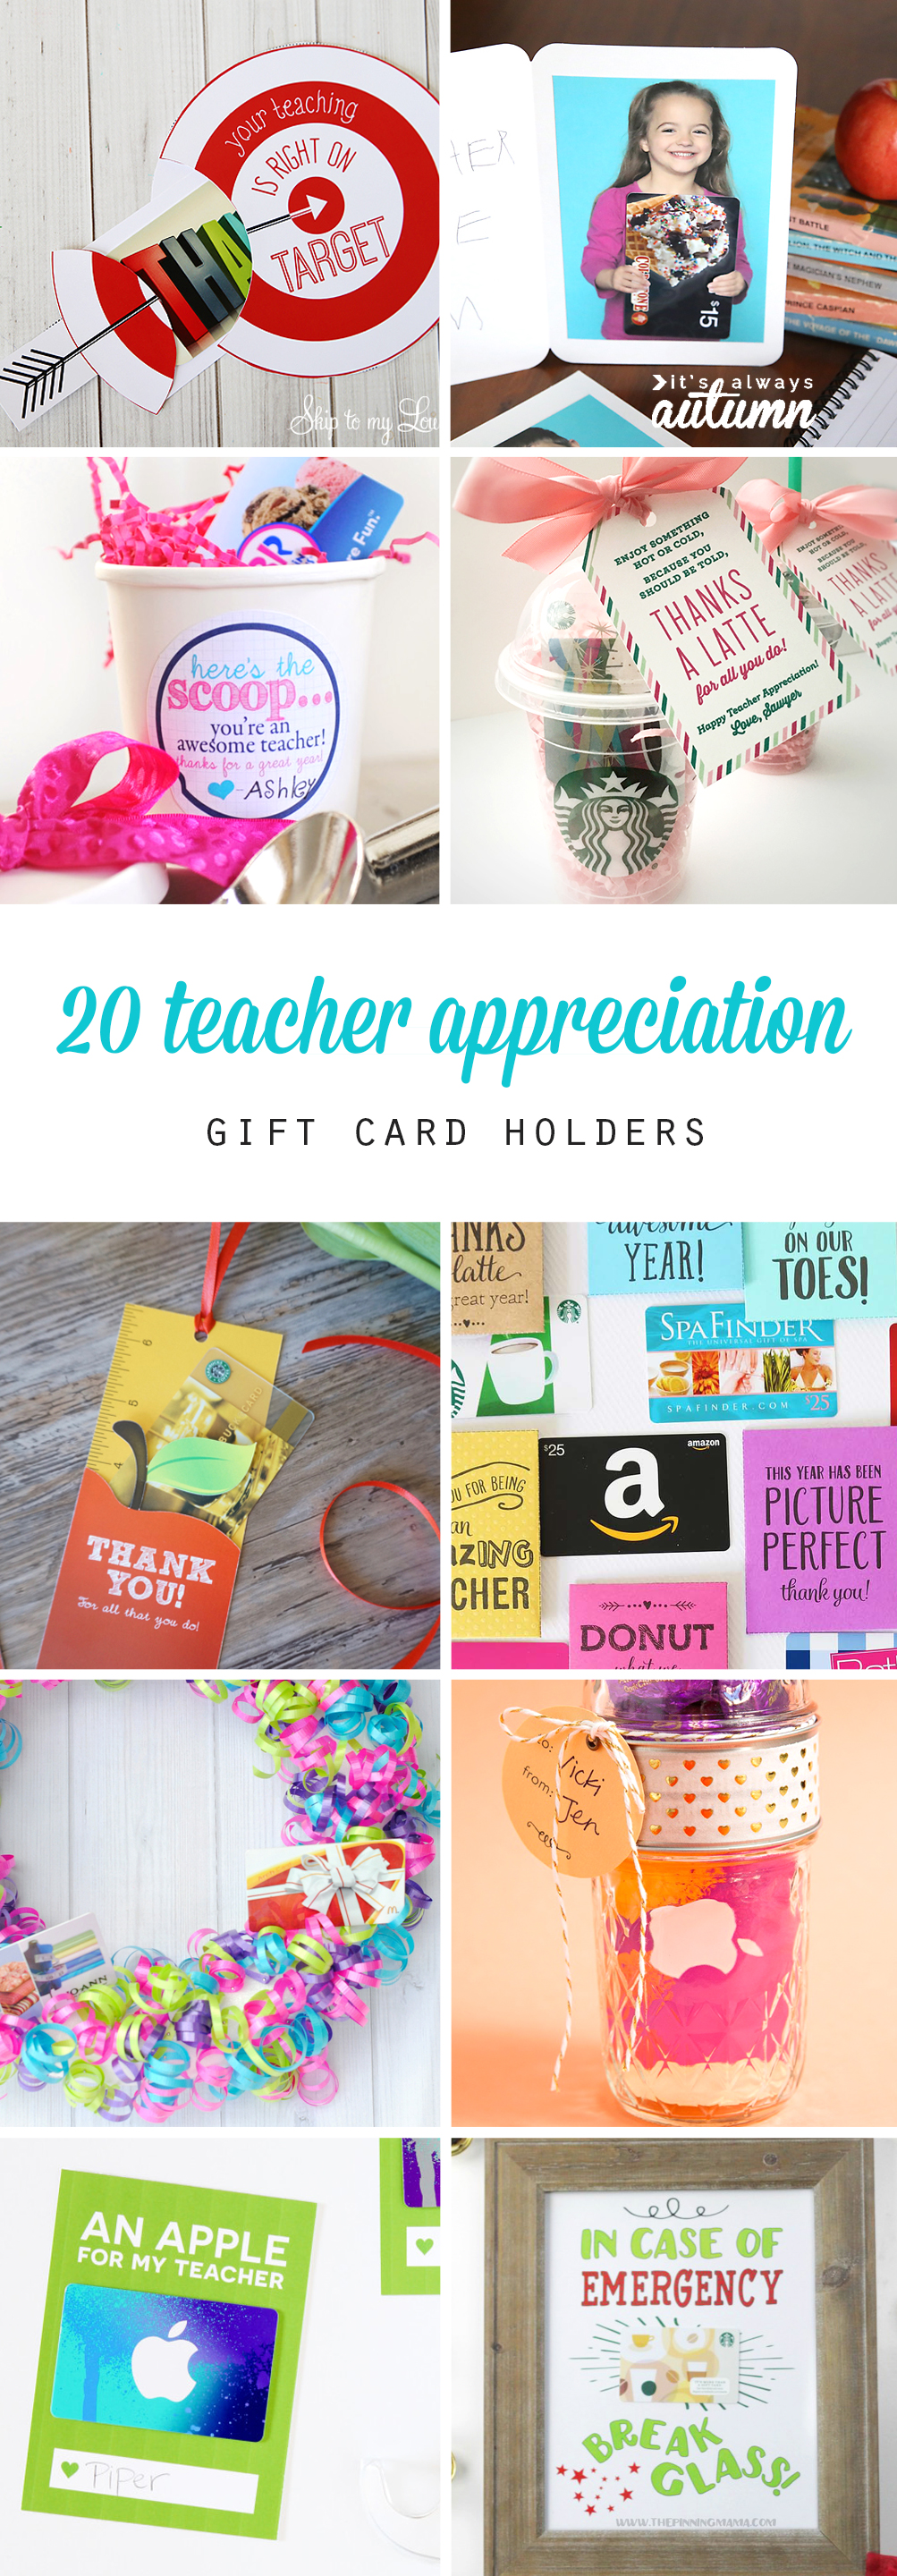 Collage of teacher appreciation gift card holders